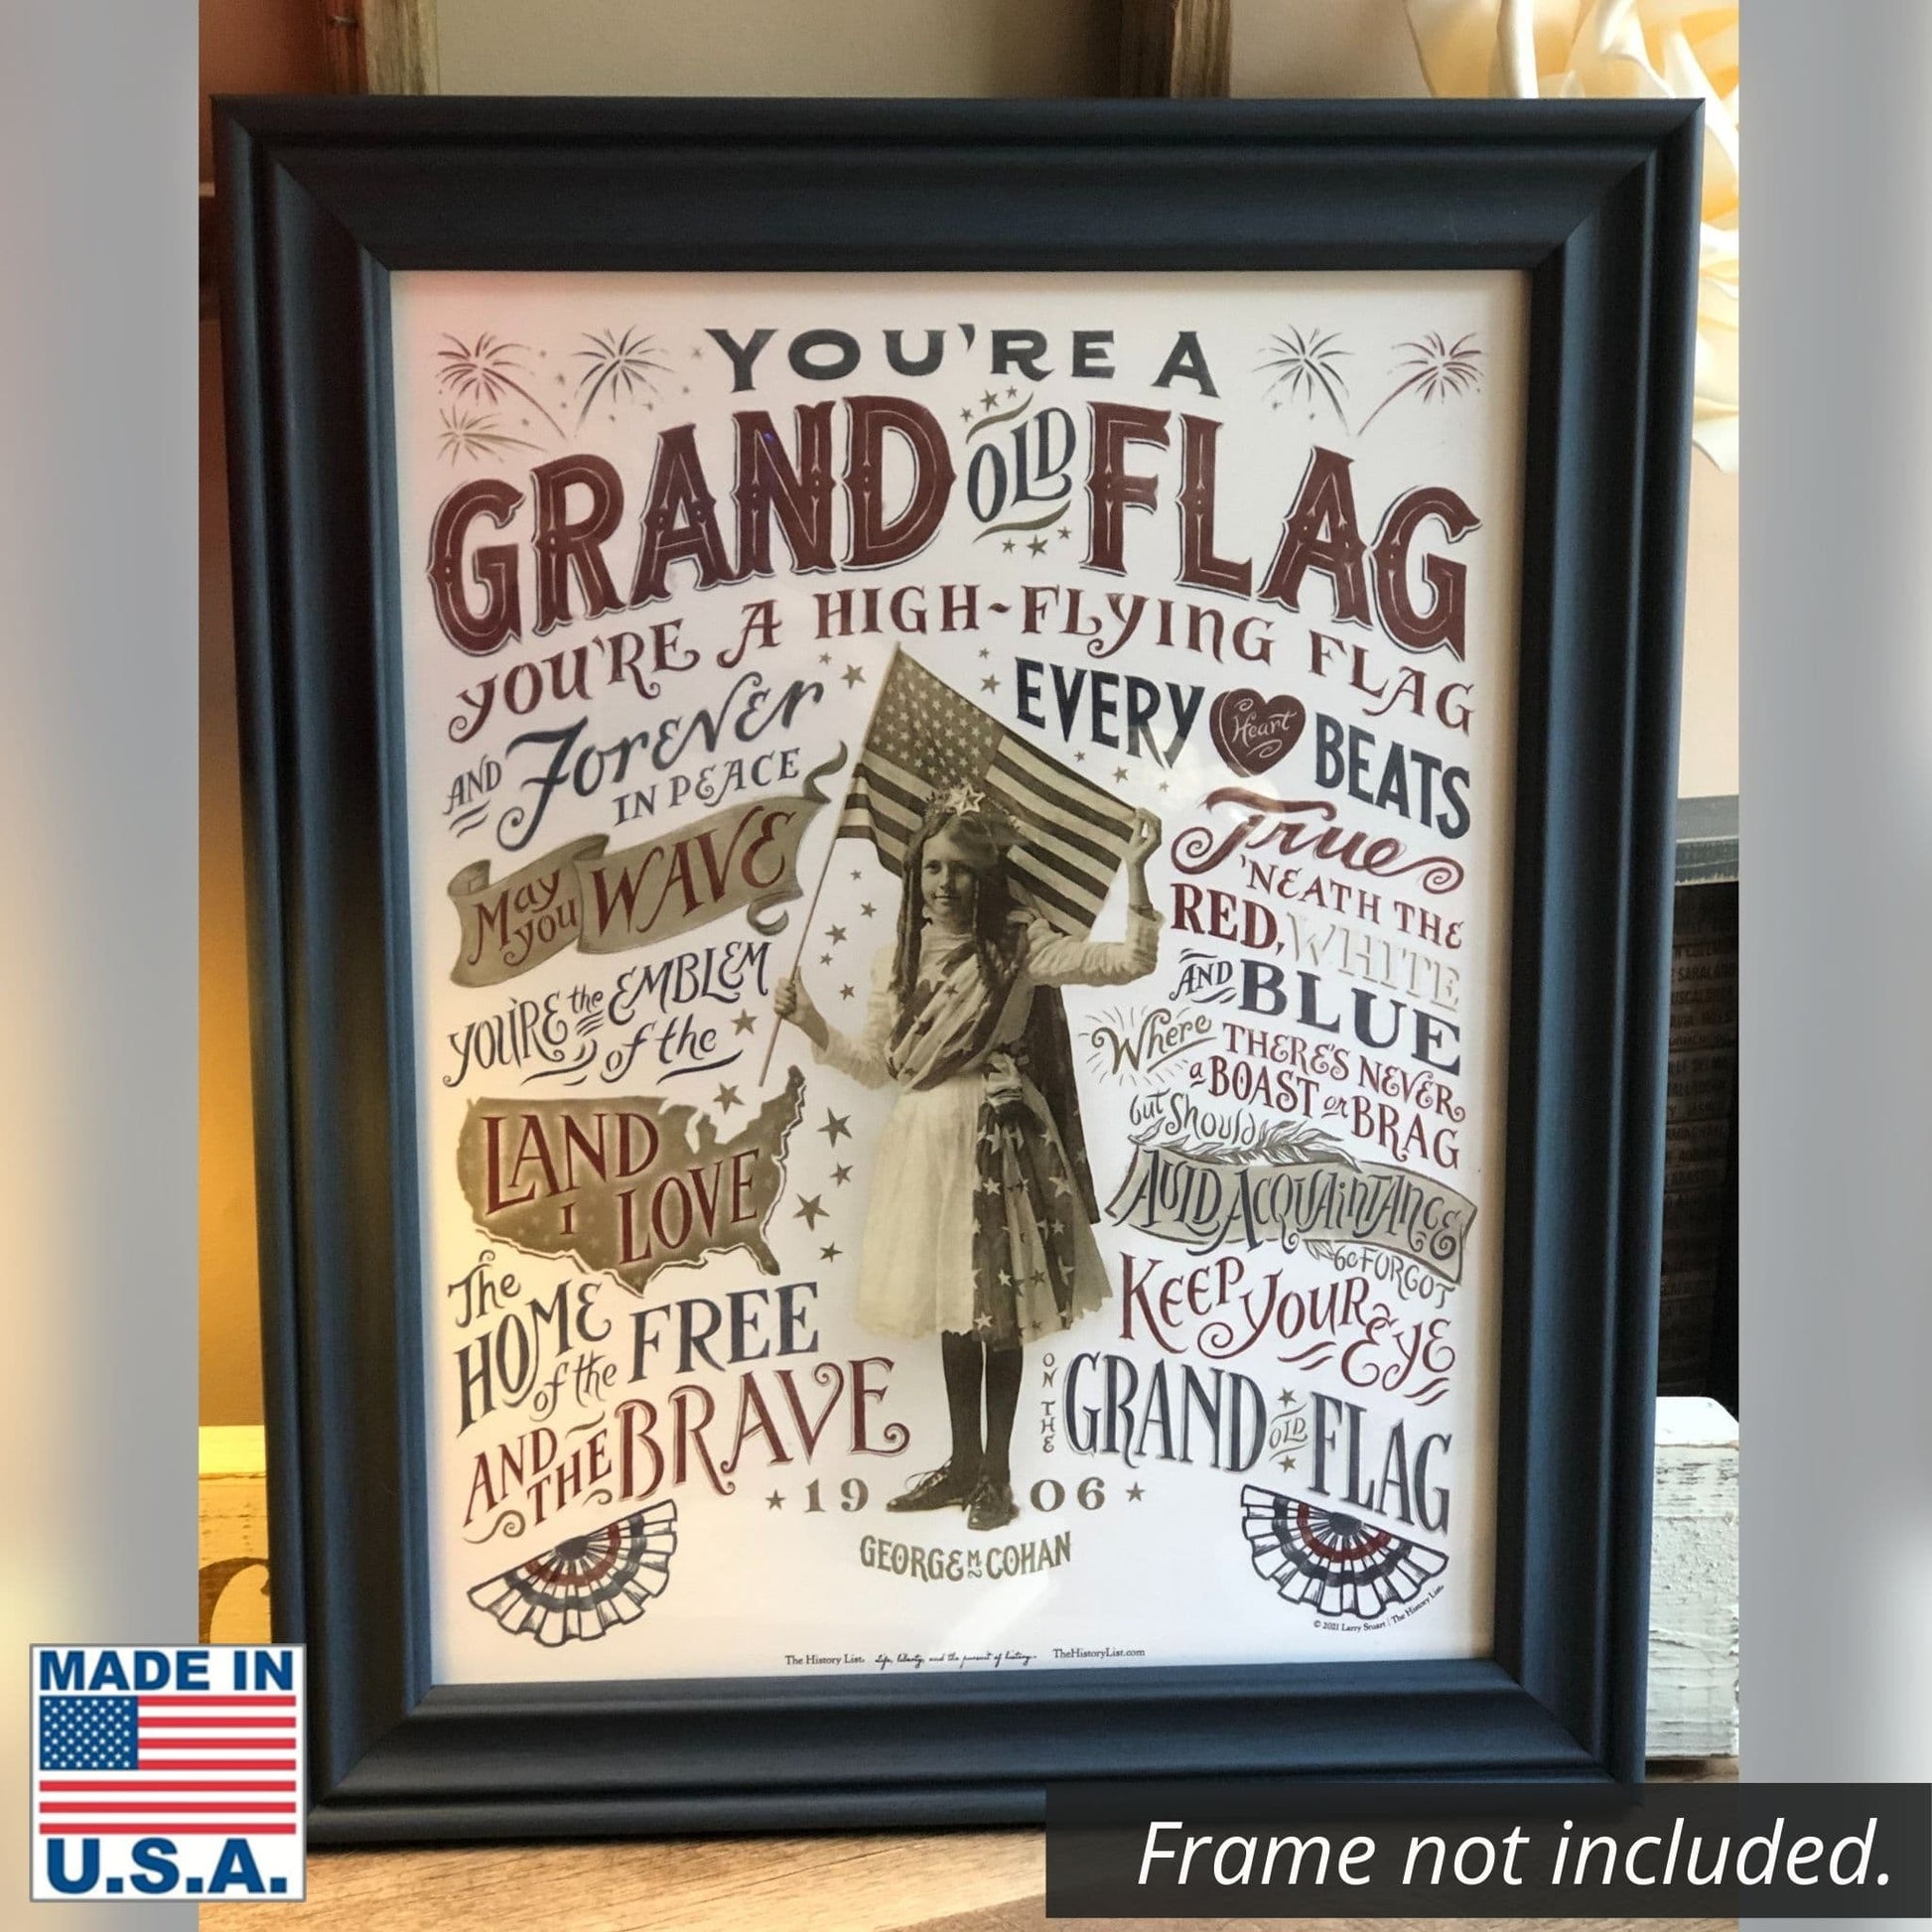 Framed "Grand Old Flag" as a small poster from the history list store